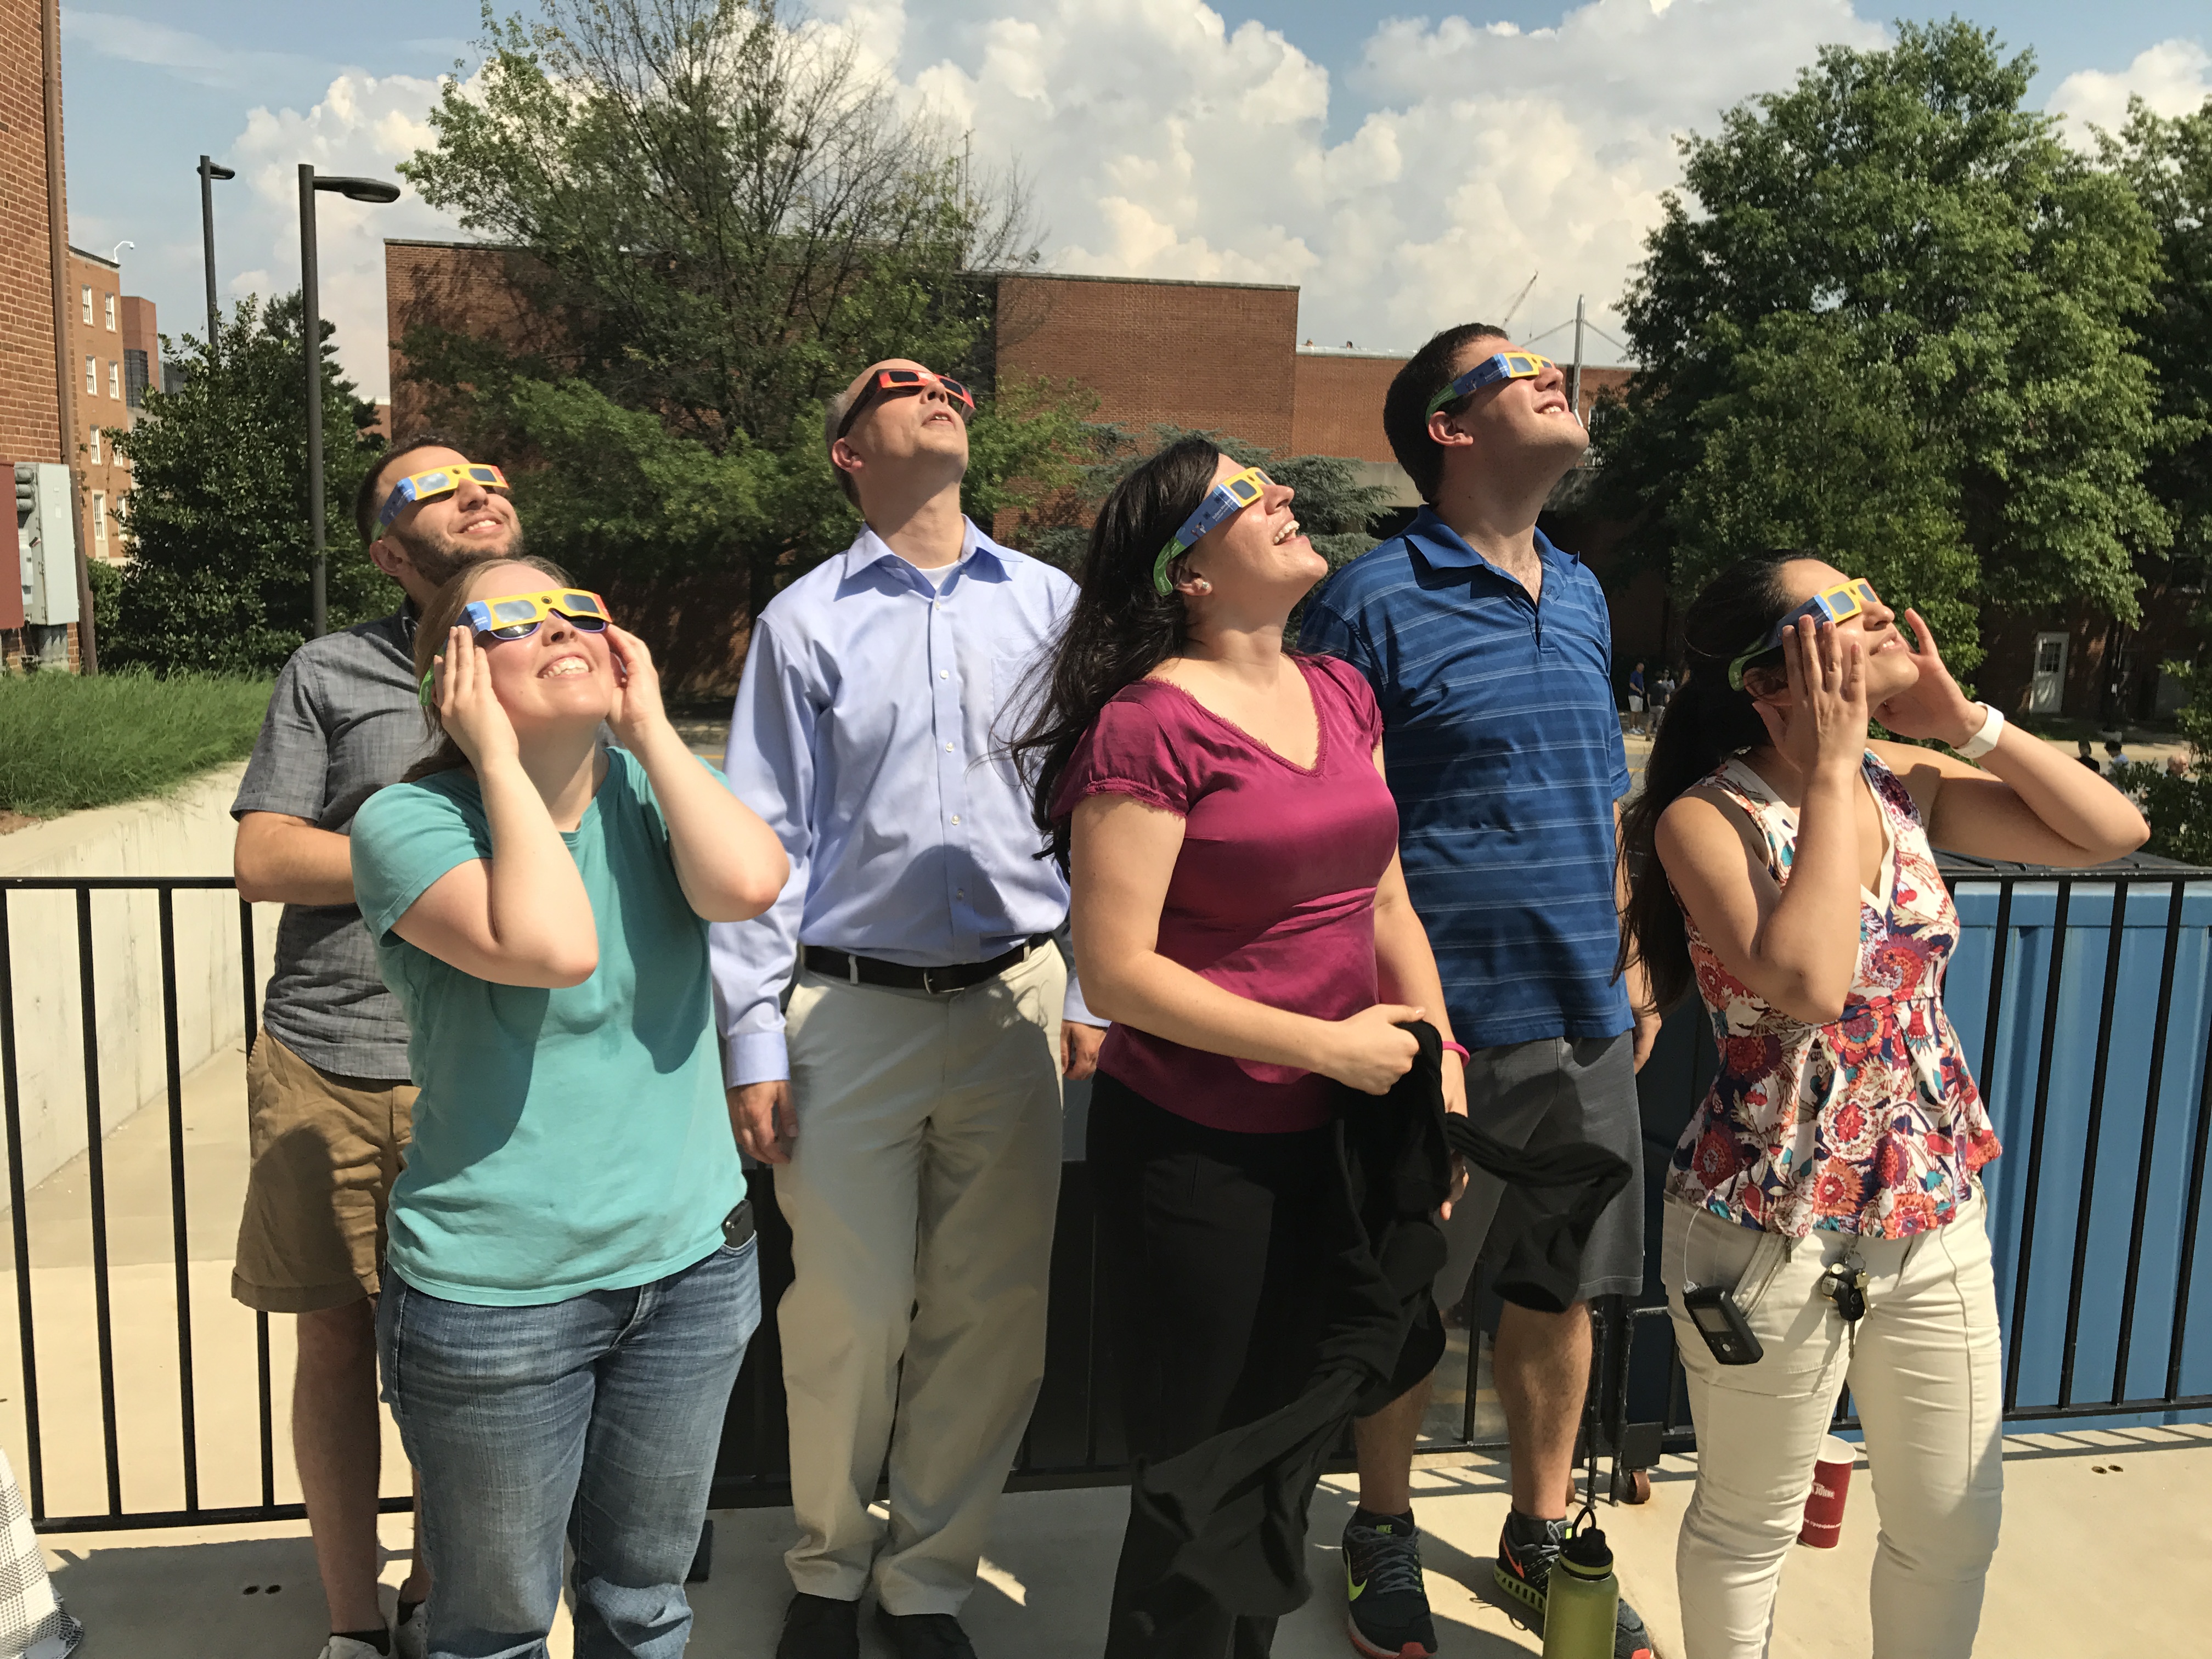 2017 Eclipse Viewing